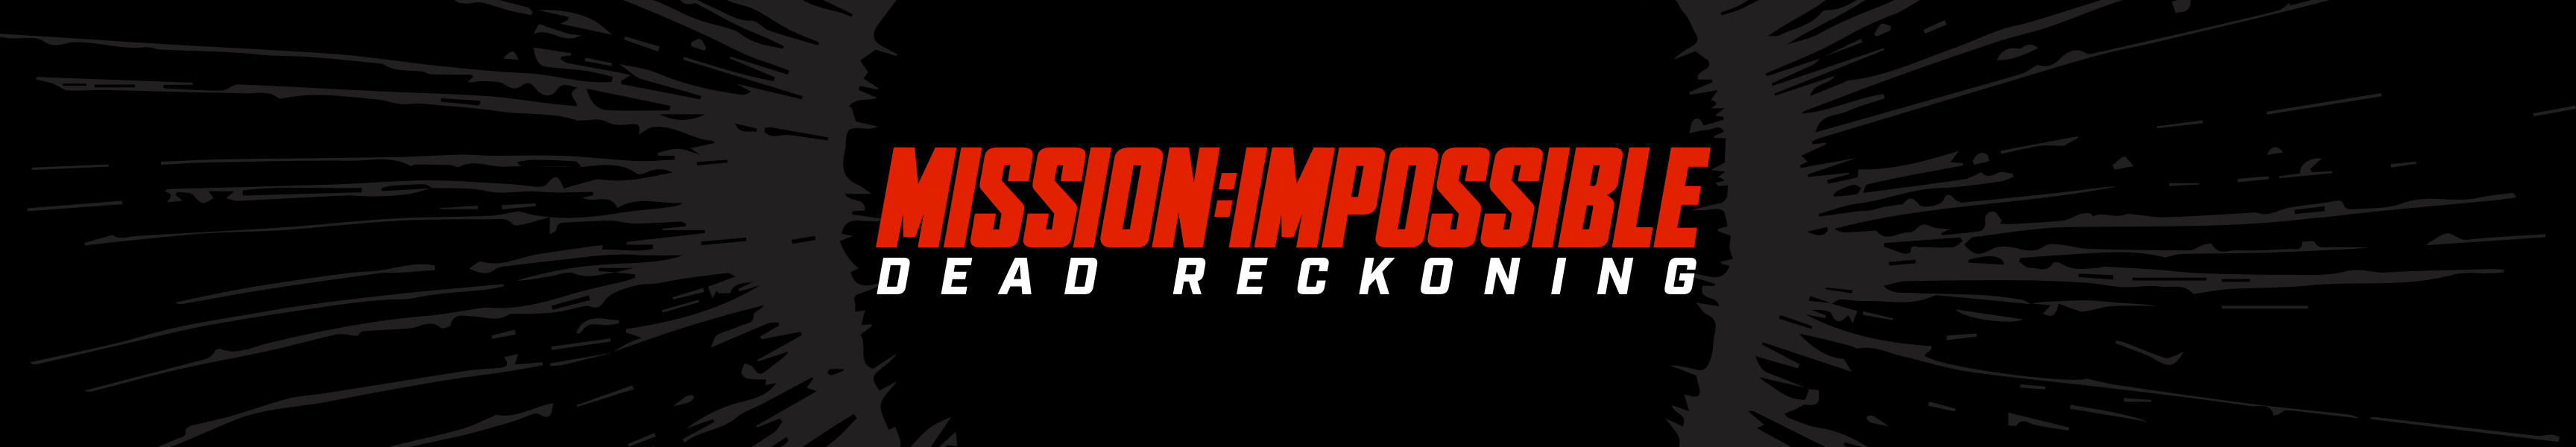 Mission: Impossible Accessories